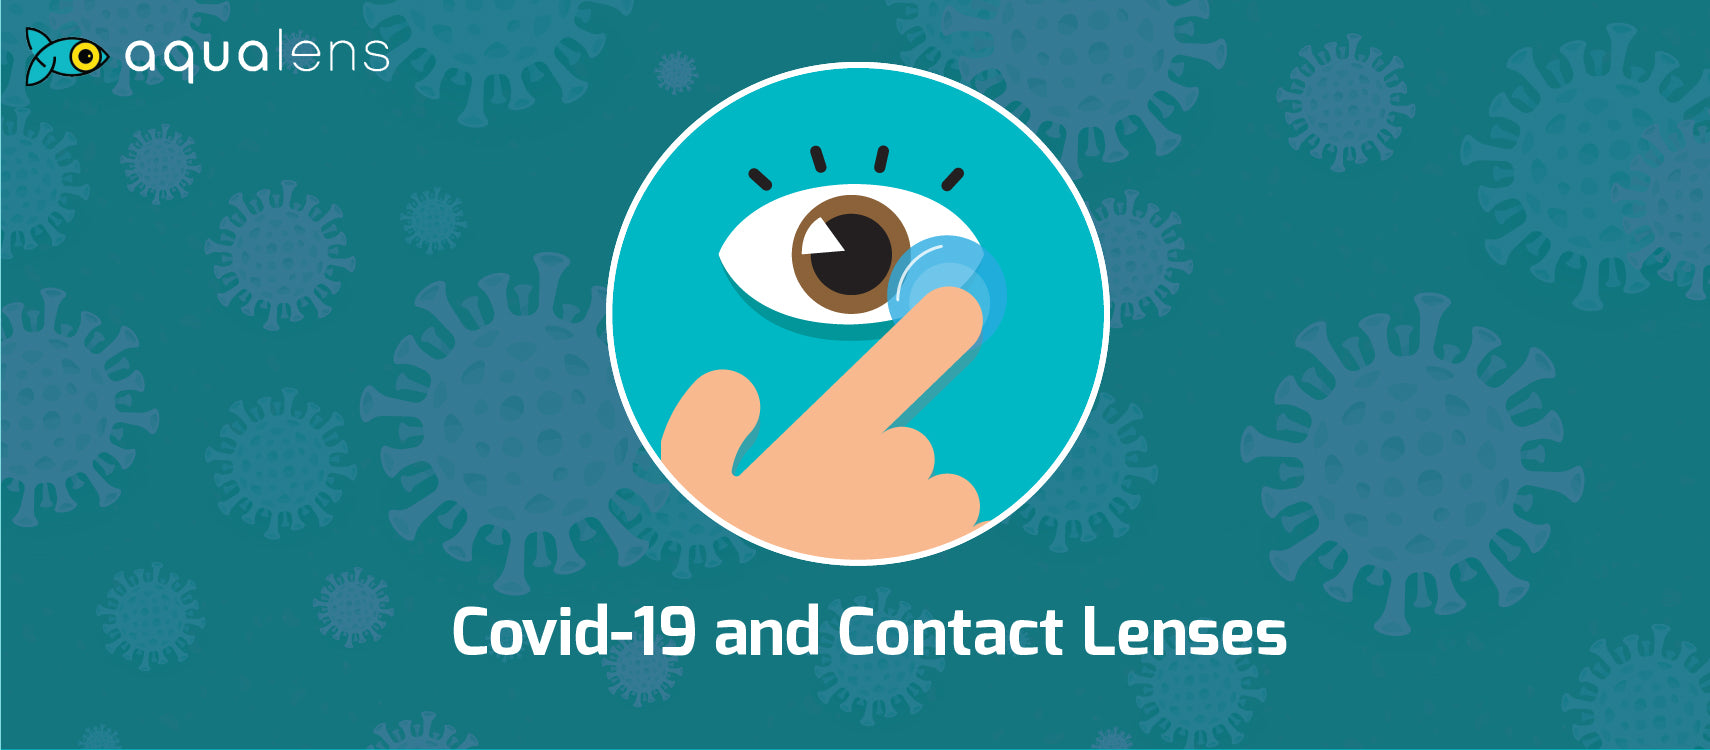 Wearing Contact Lenses During Covid-19